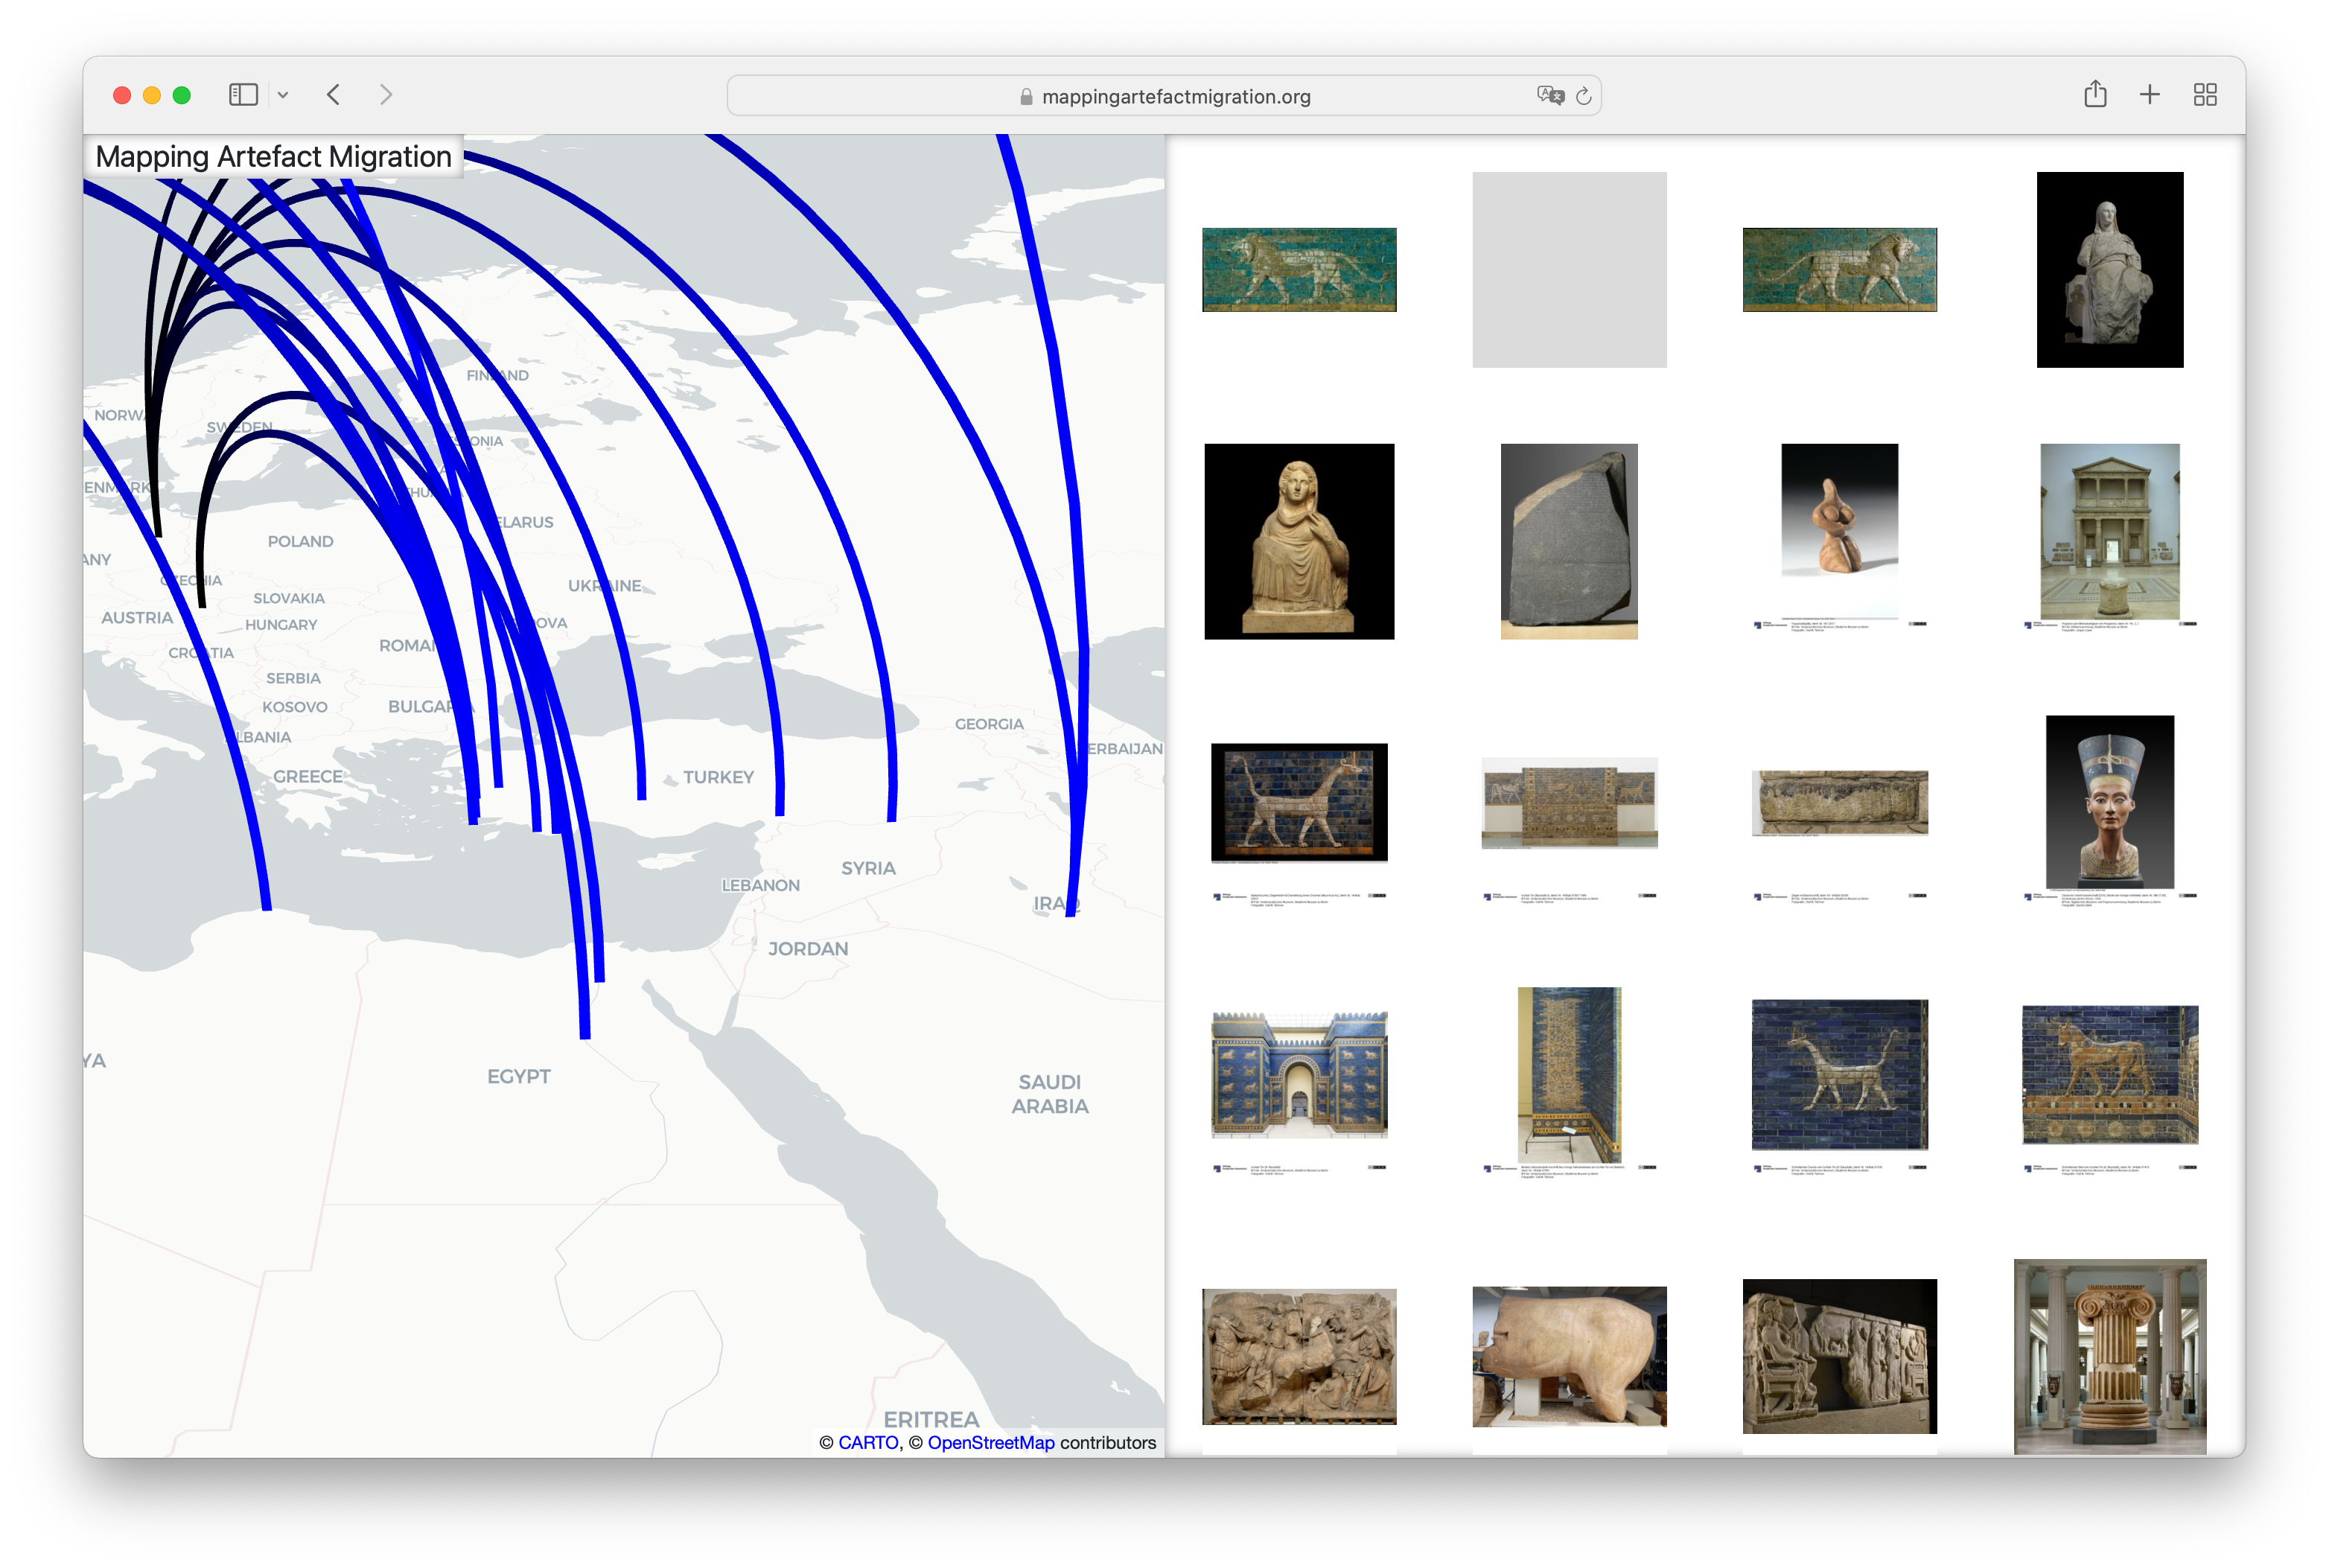 Mapping Artefact Migration